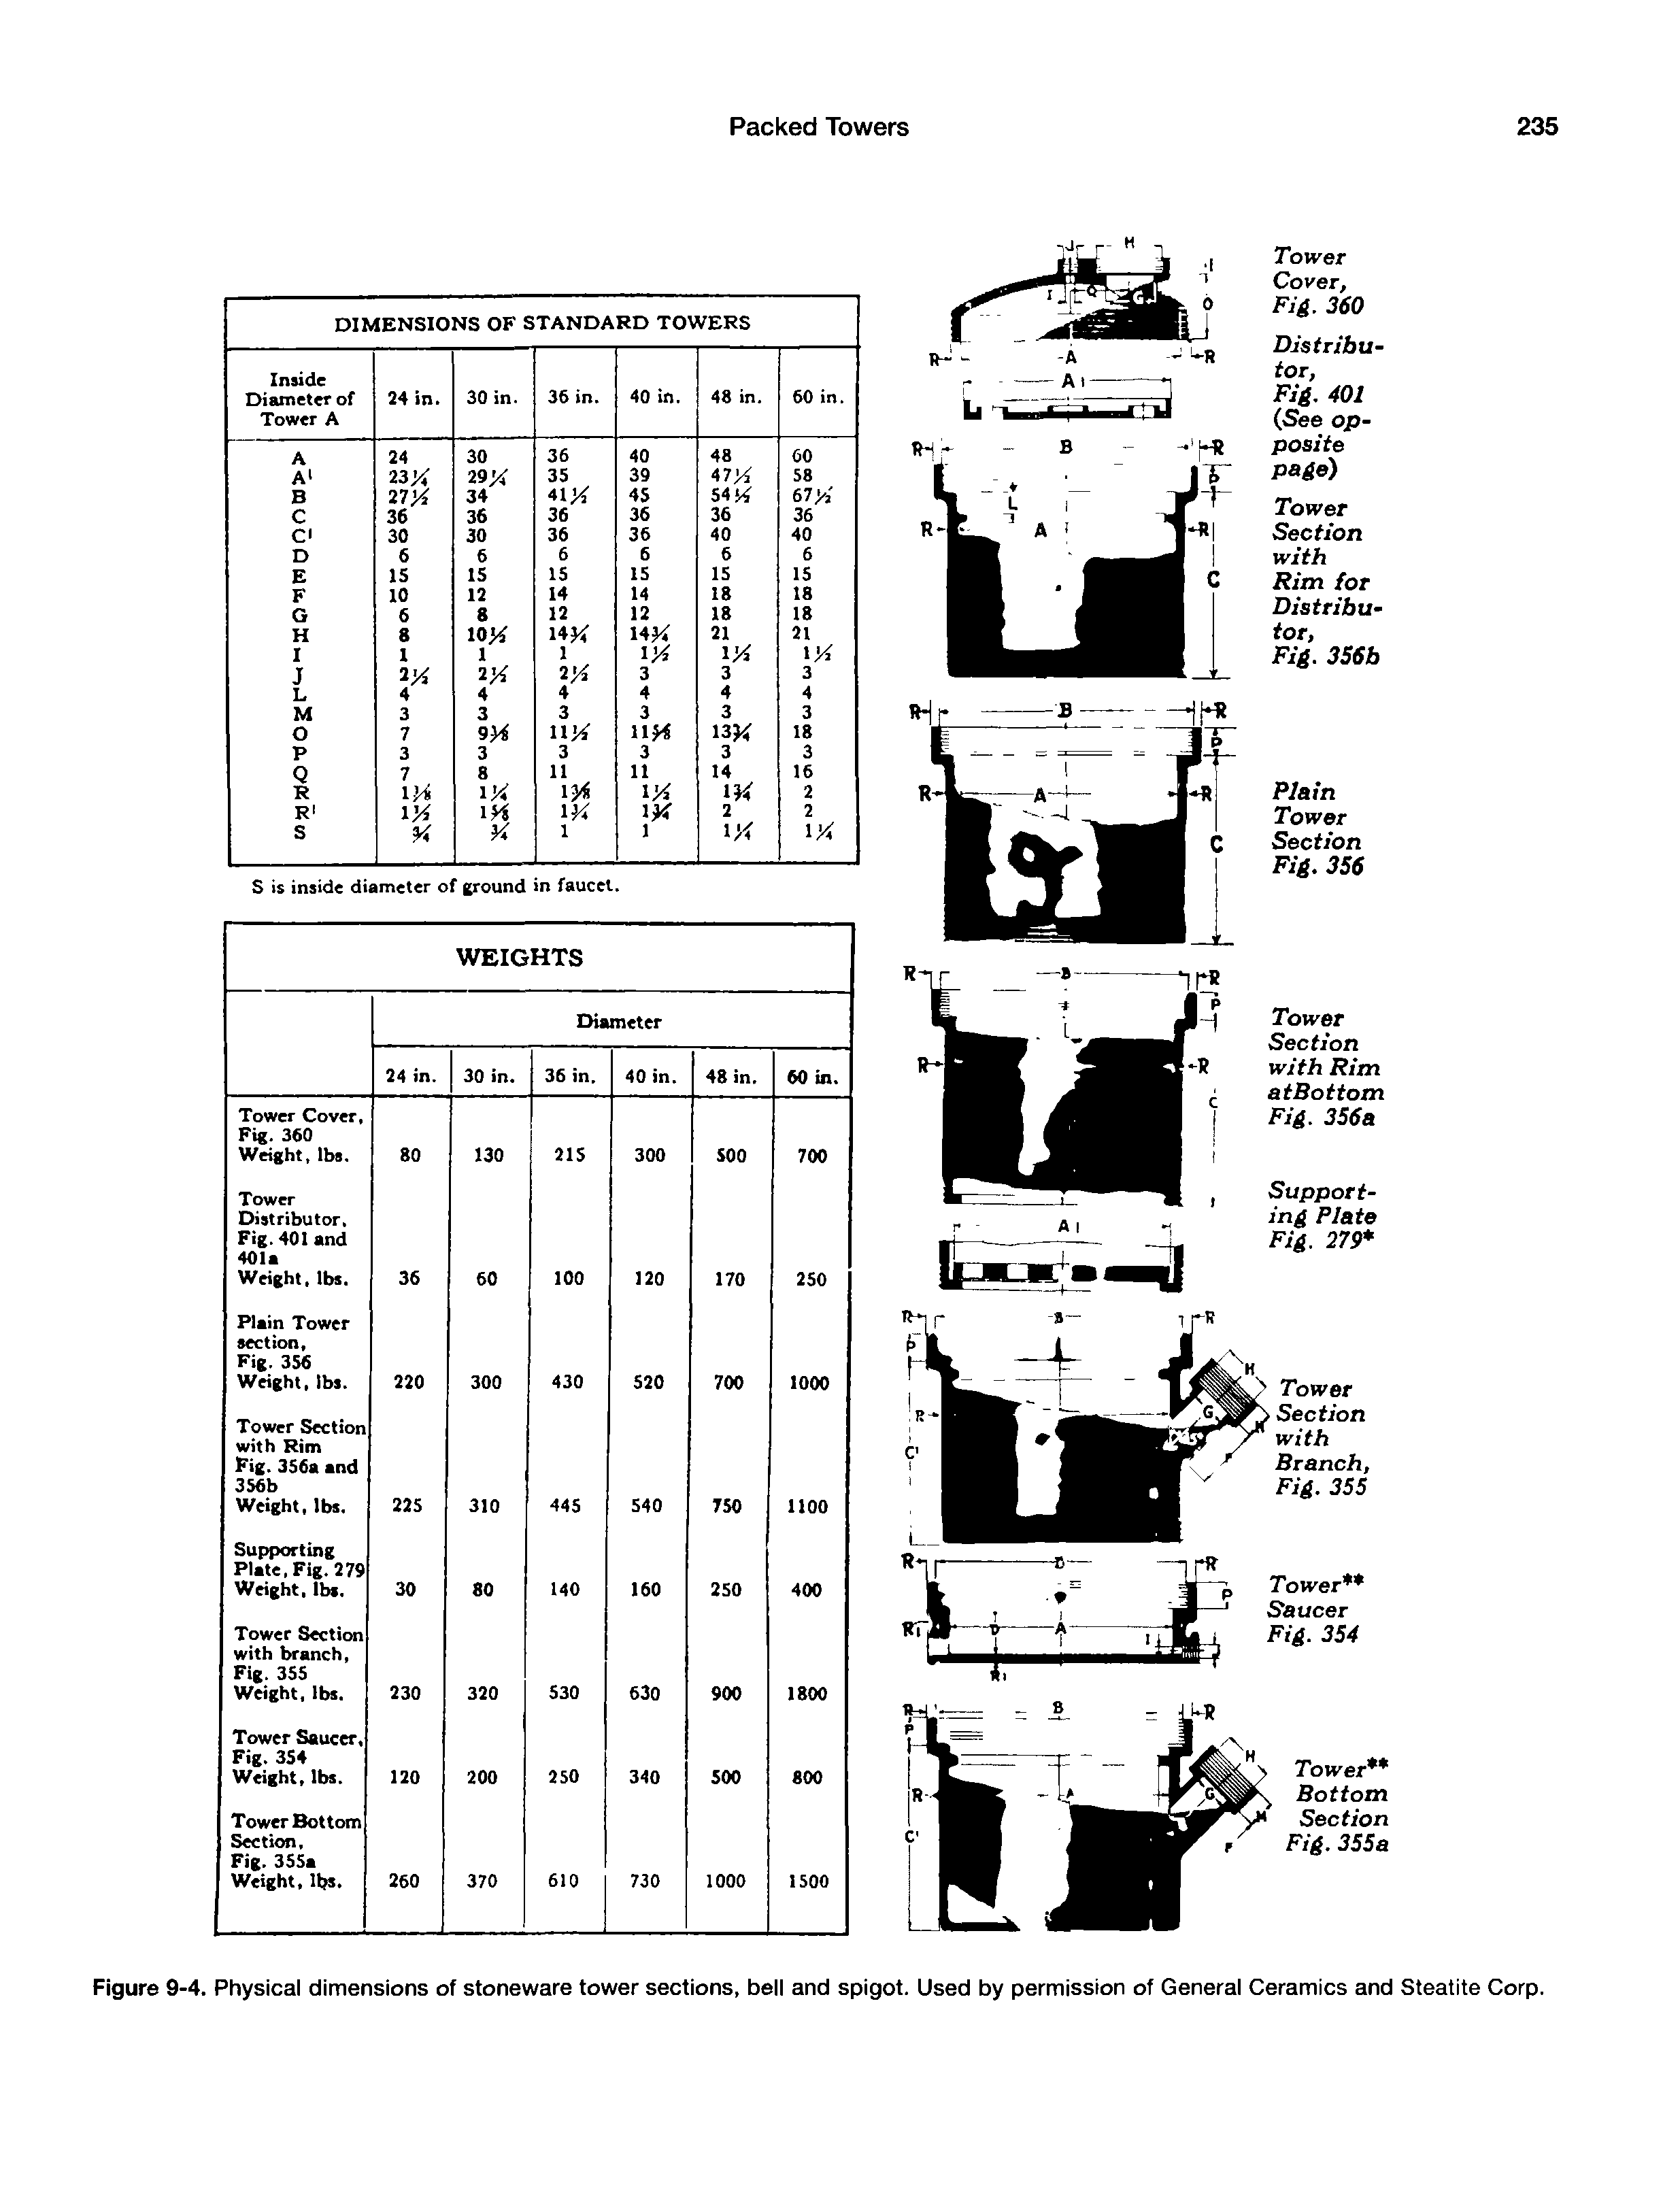 Figure 9-4. Physical dimensions of stoneware tower sections, bell and spigot. Used by permission of General Ceramics and Steatite Corp.